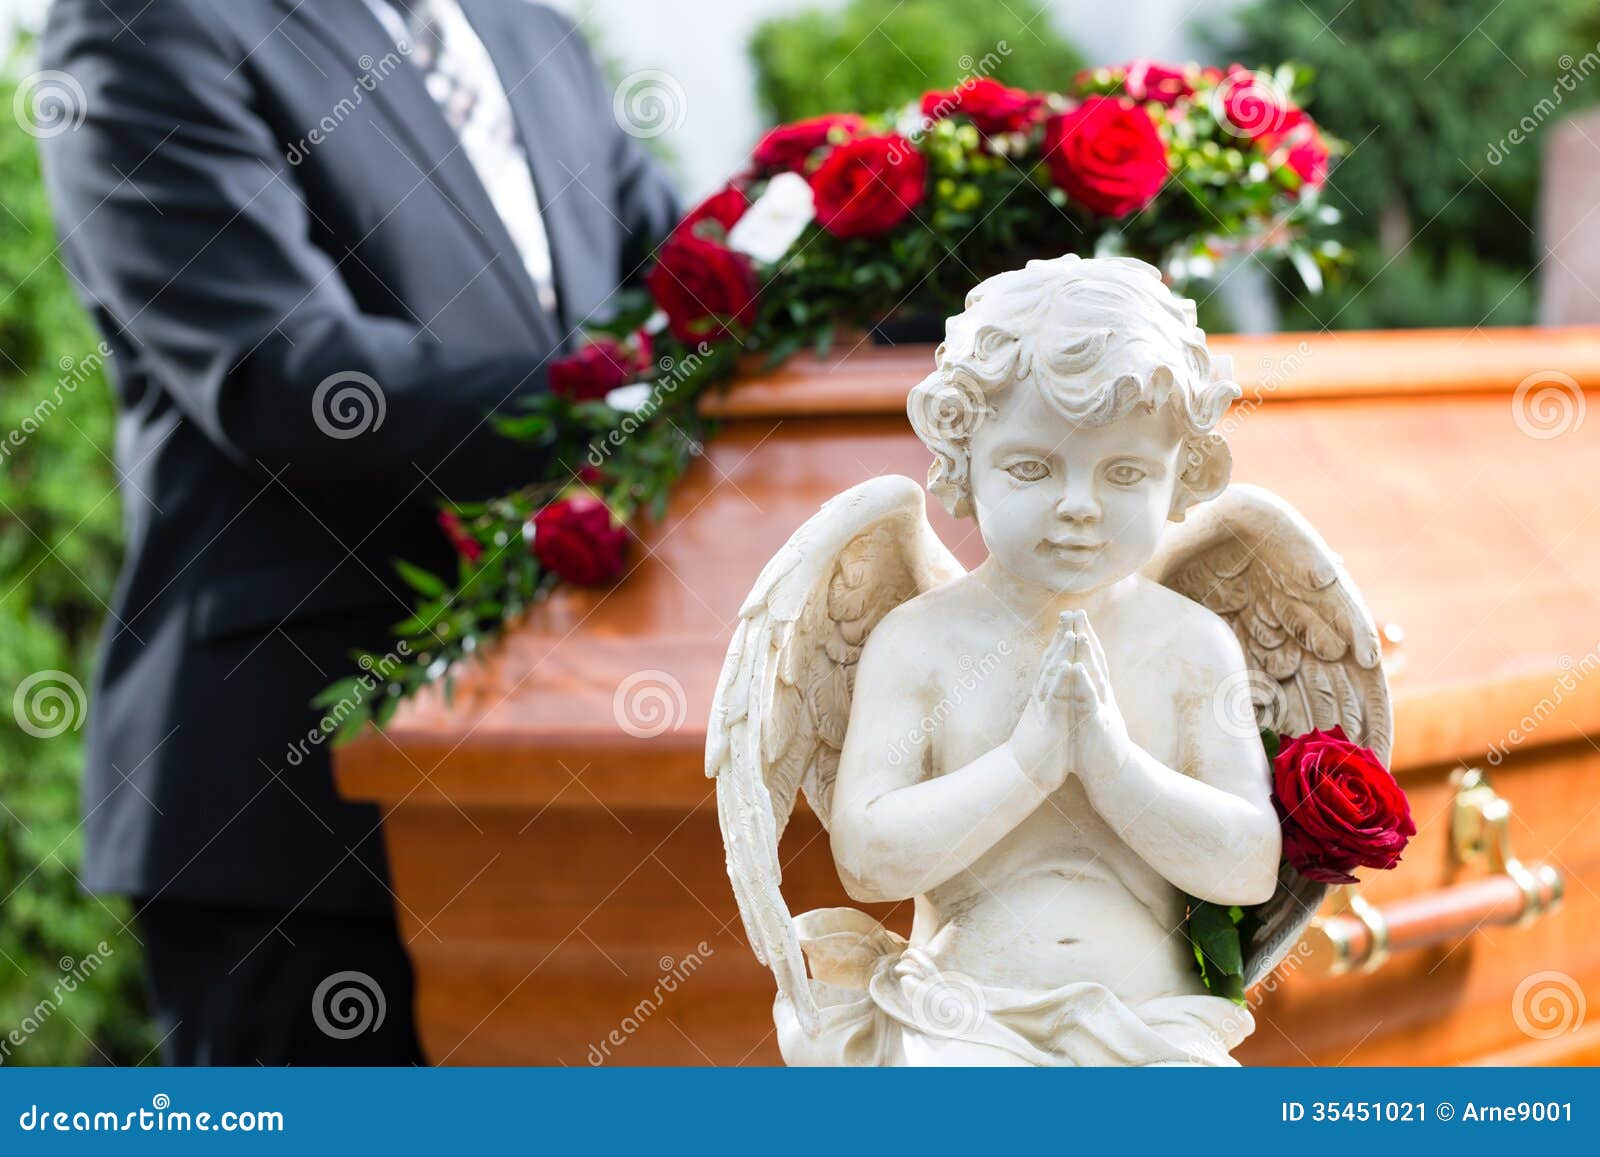 mourning man at funeral with coffin